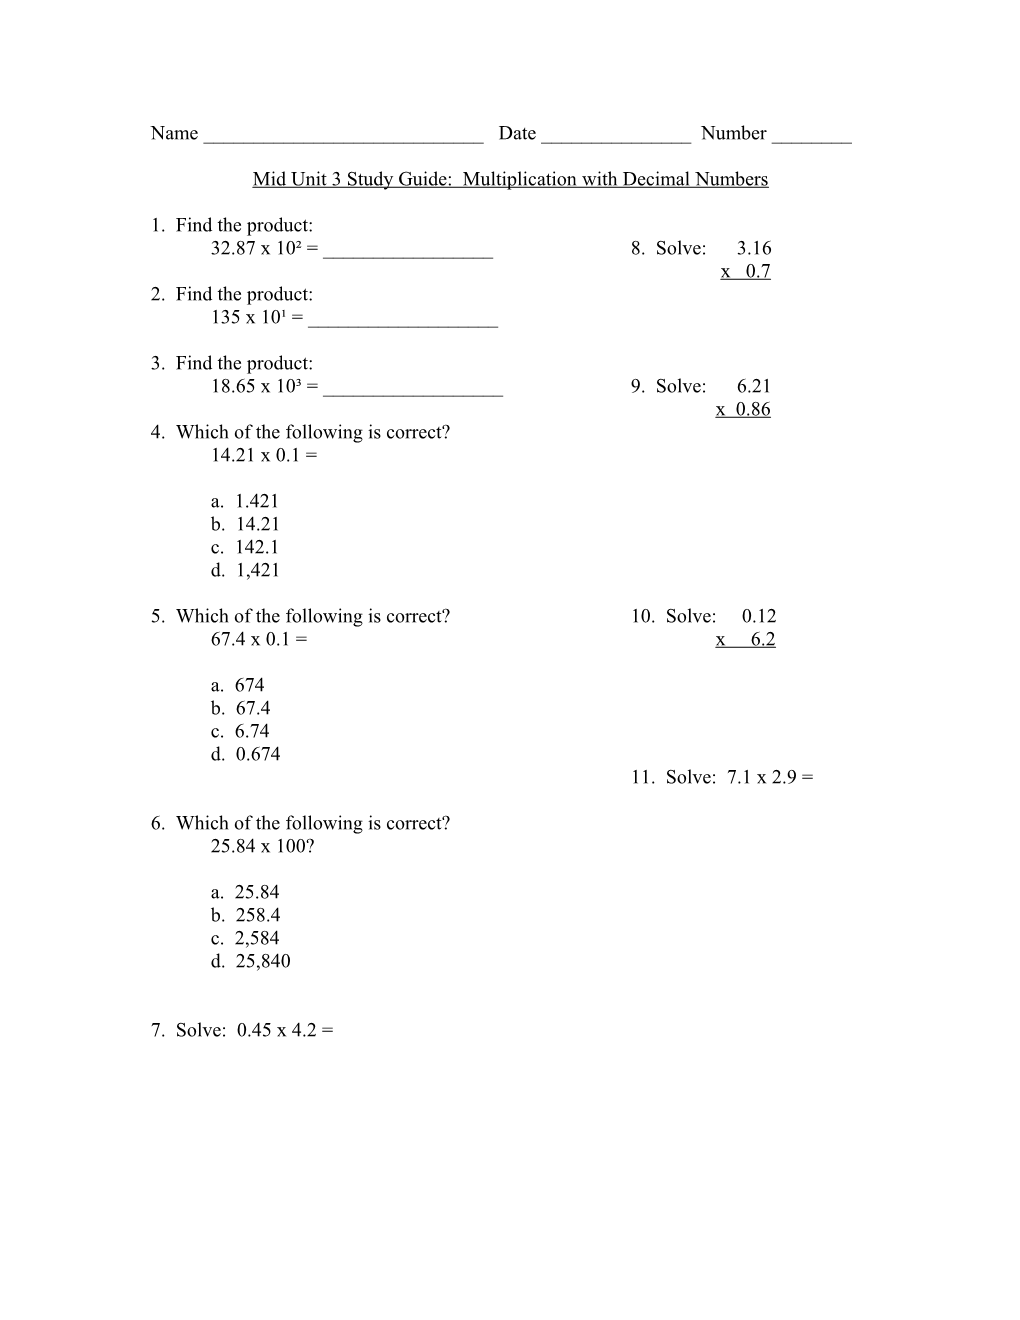 Mid Unit 3 Study Guide: Multiplication with Decimal Numbers